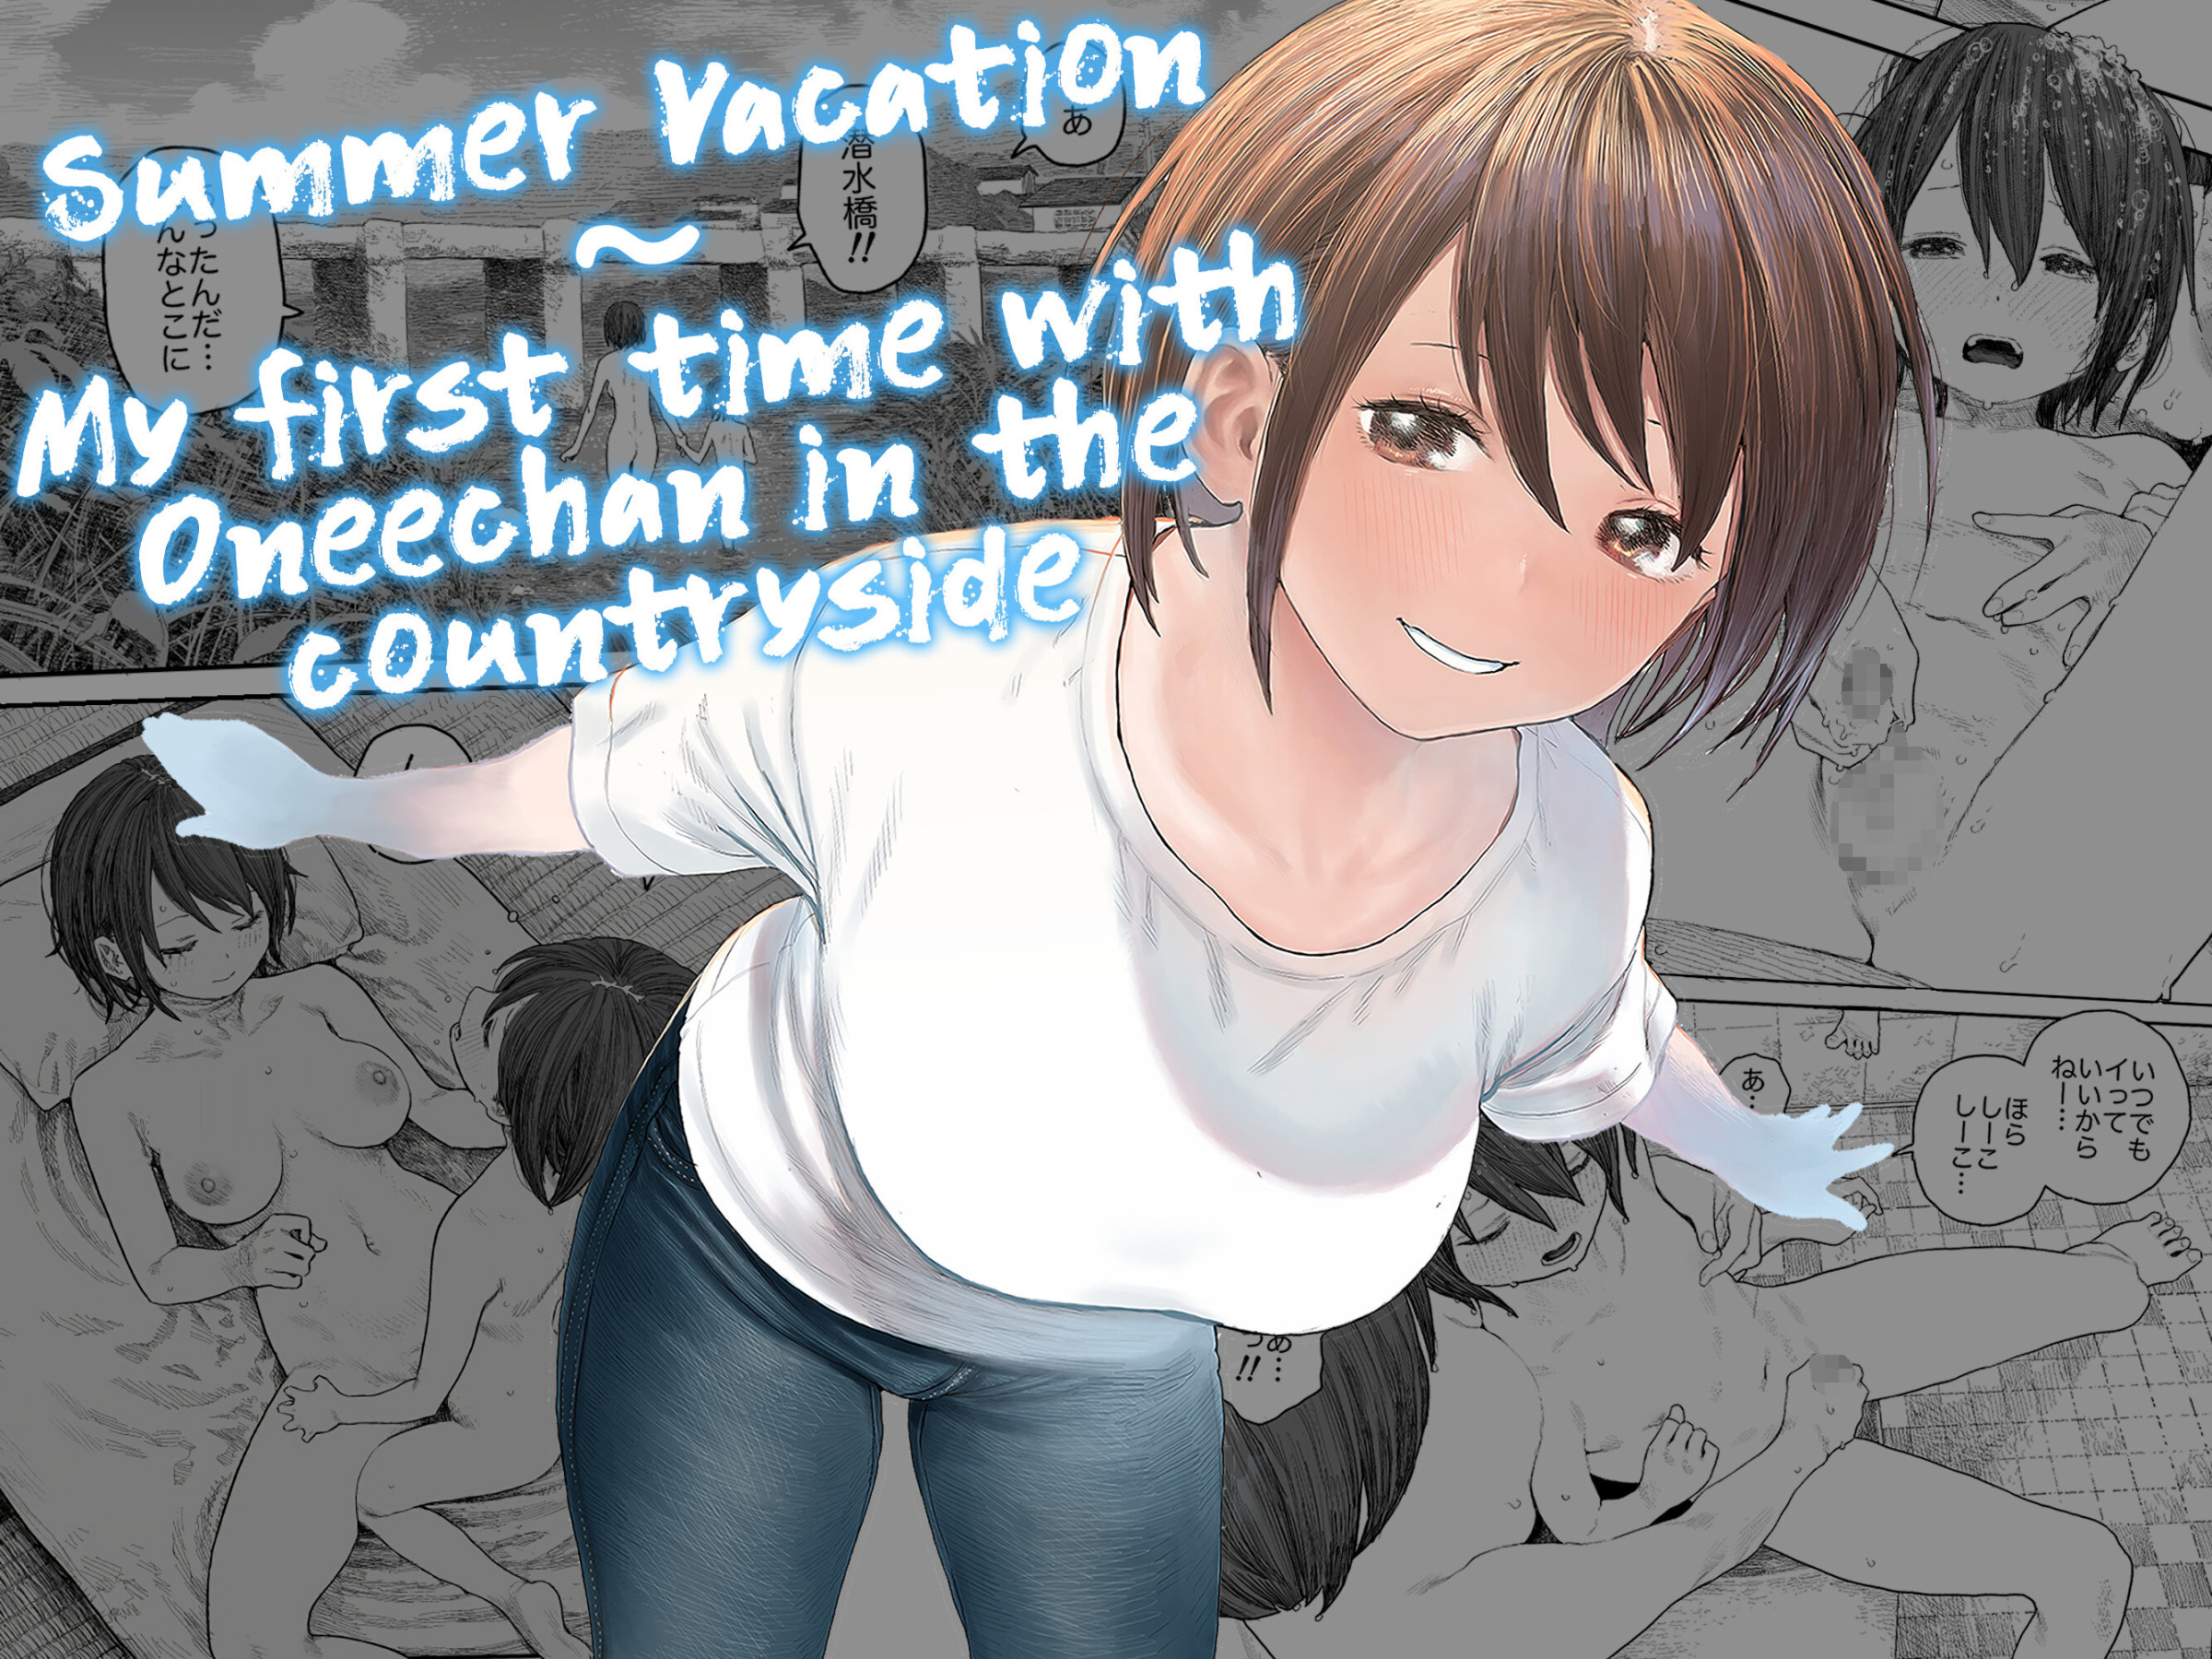 Hentai Manga Comic-Summer Vacation~My First Time With Oneechan In The Countryside-Read-1